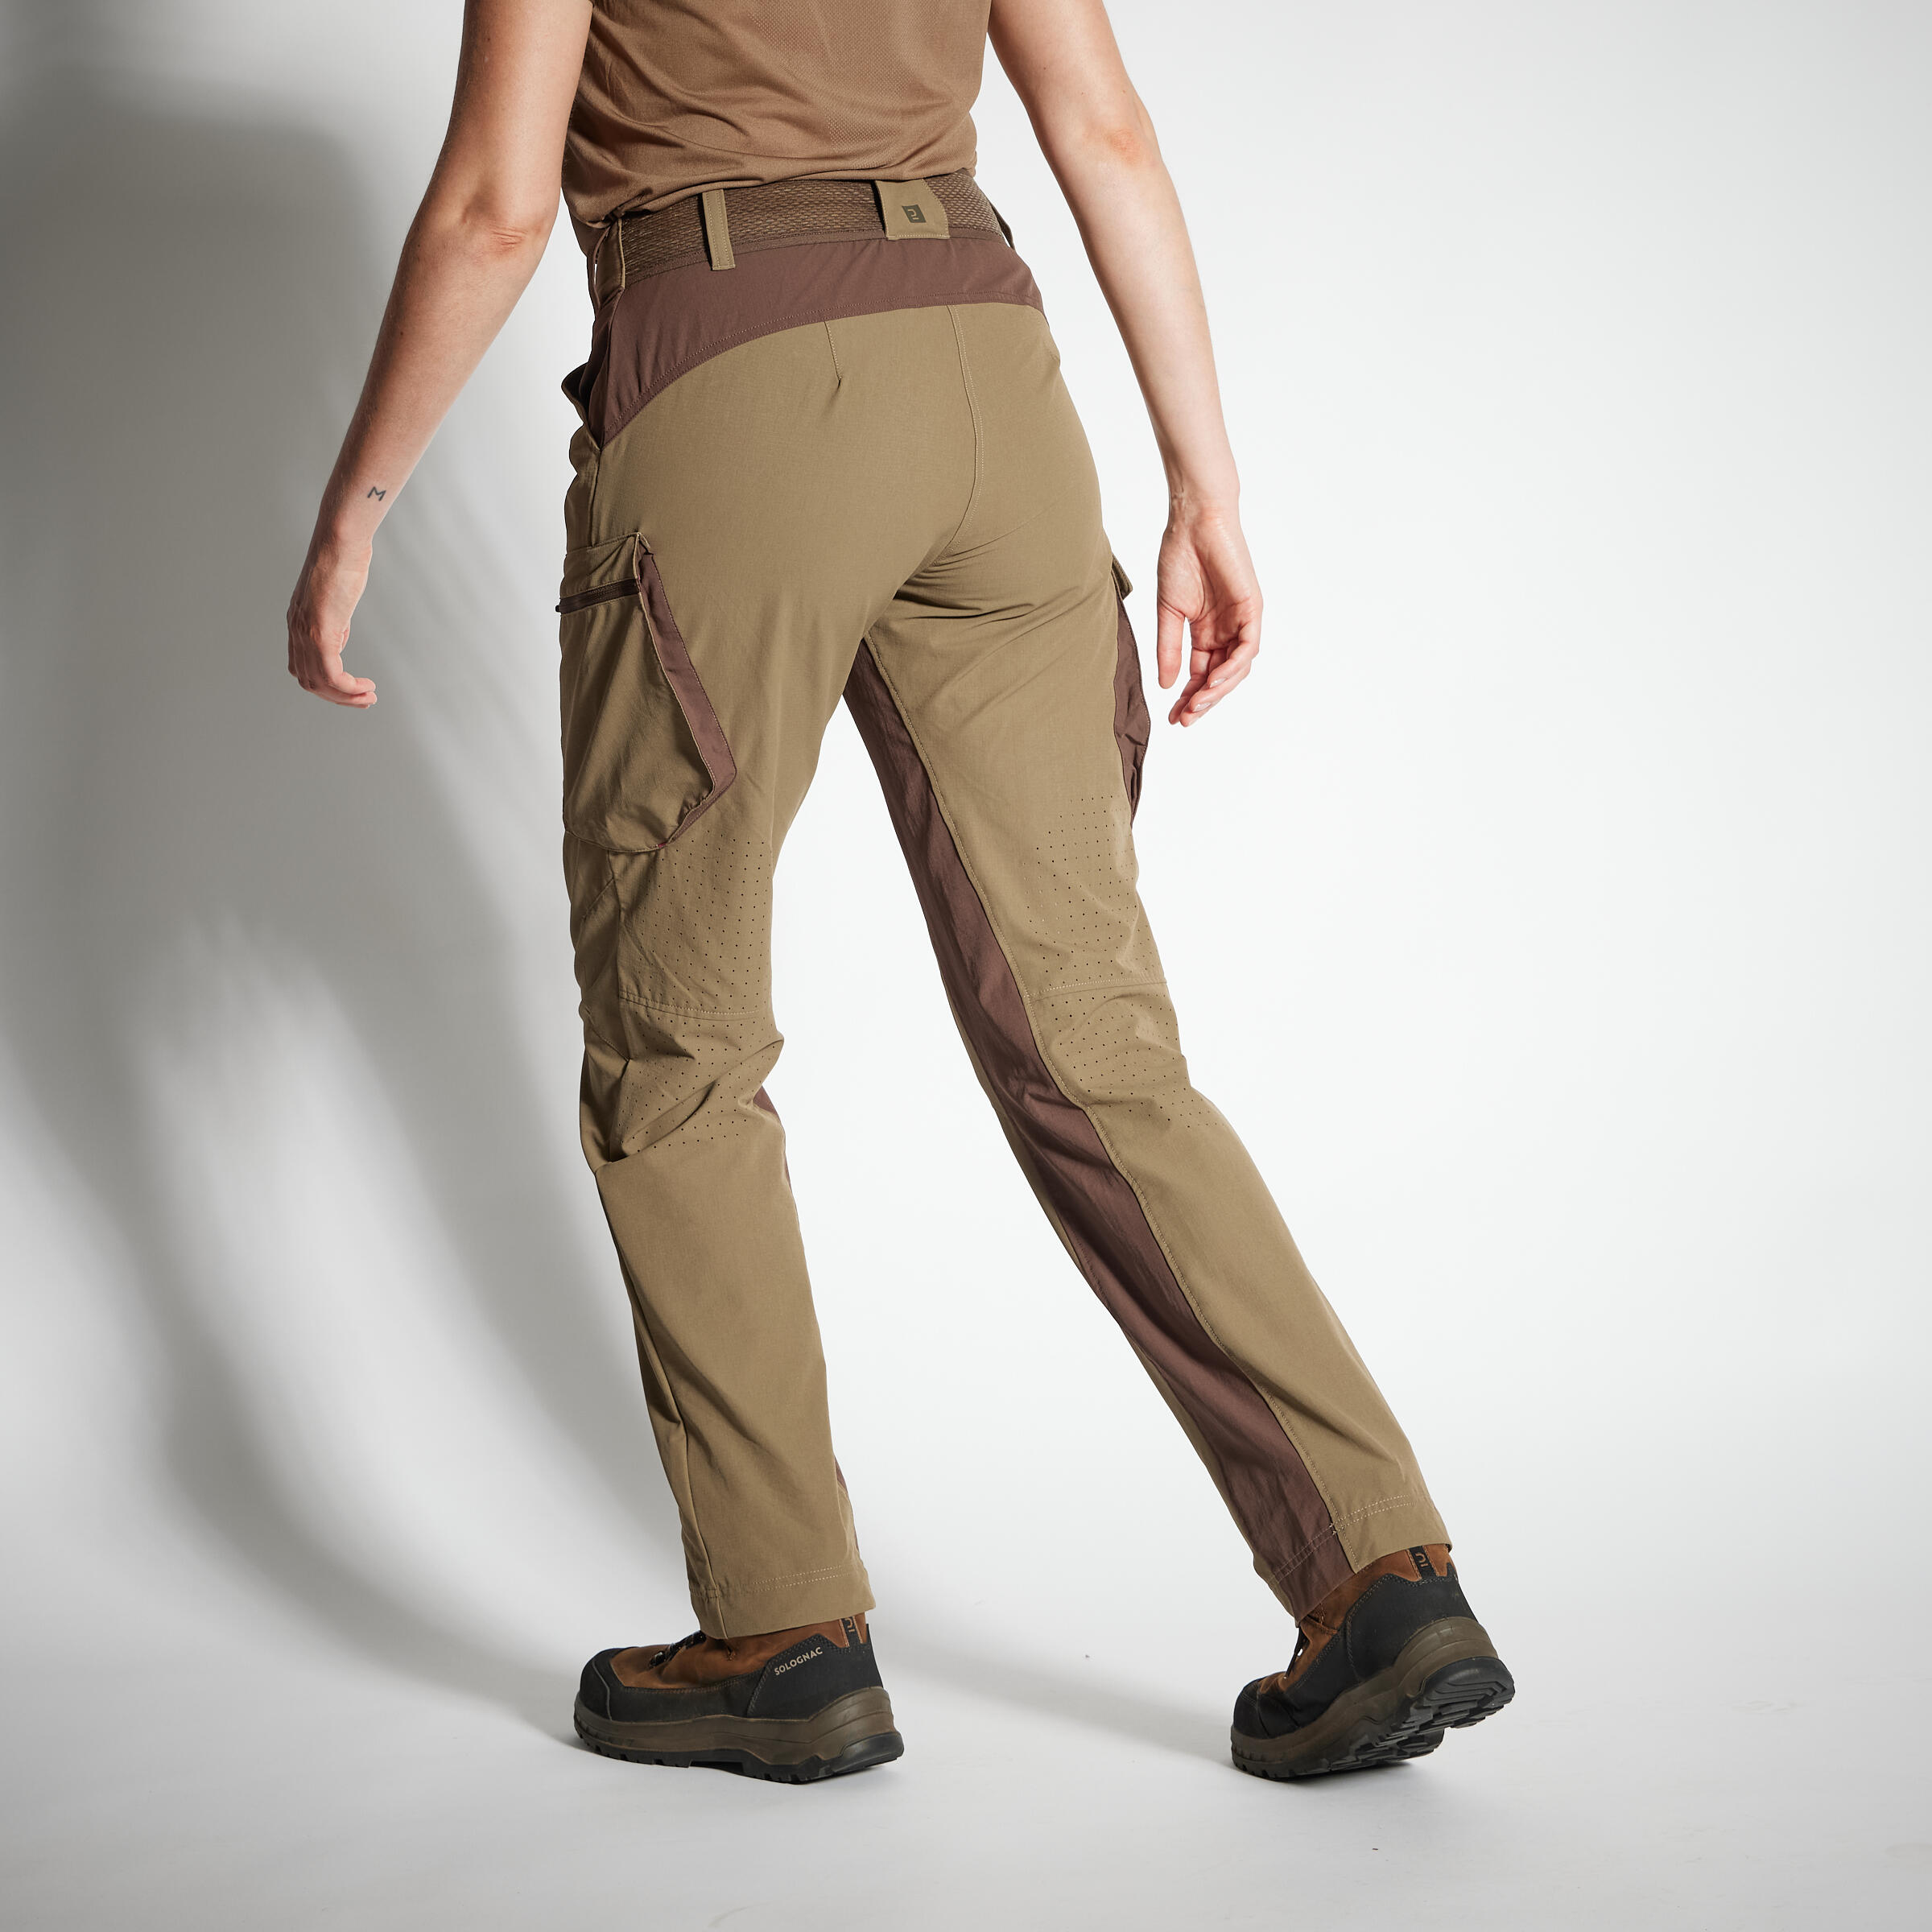 SOLOGNAC WOMEN'S TROUSERS 500 LIGHTWEIGHT BREATHABLE BROWN